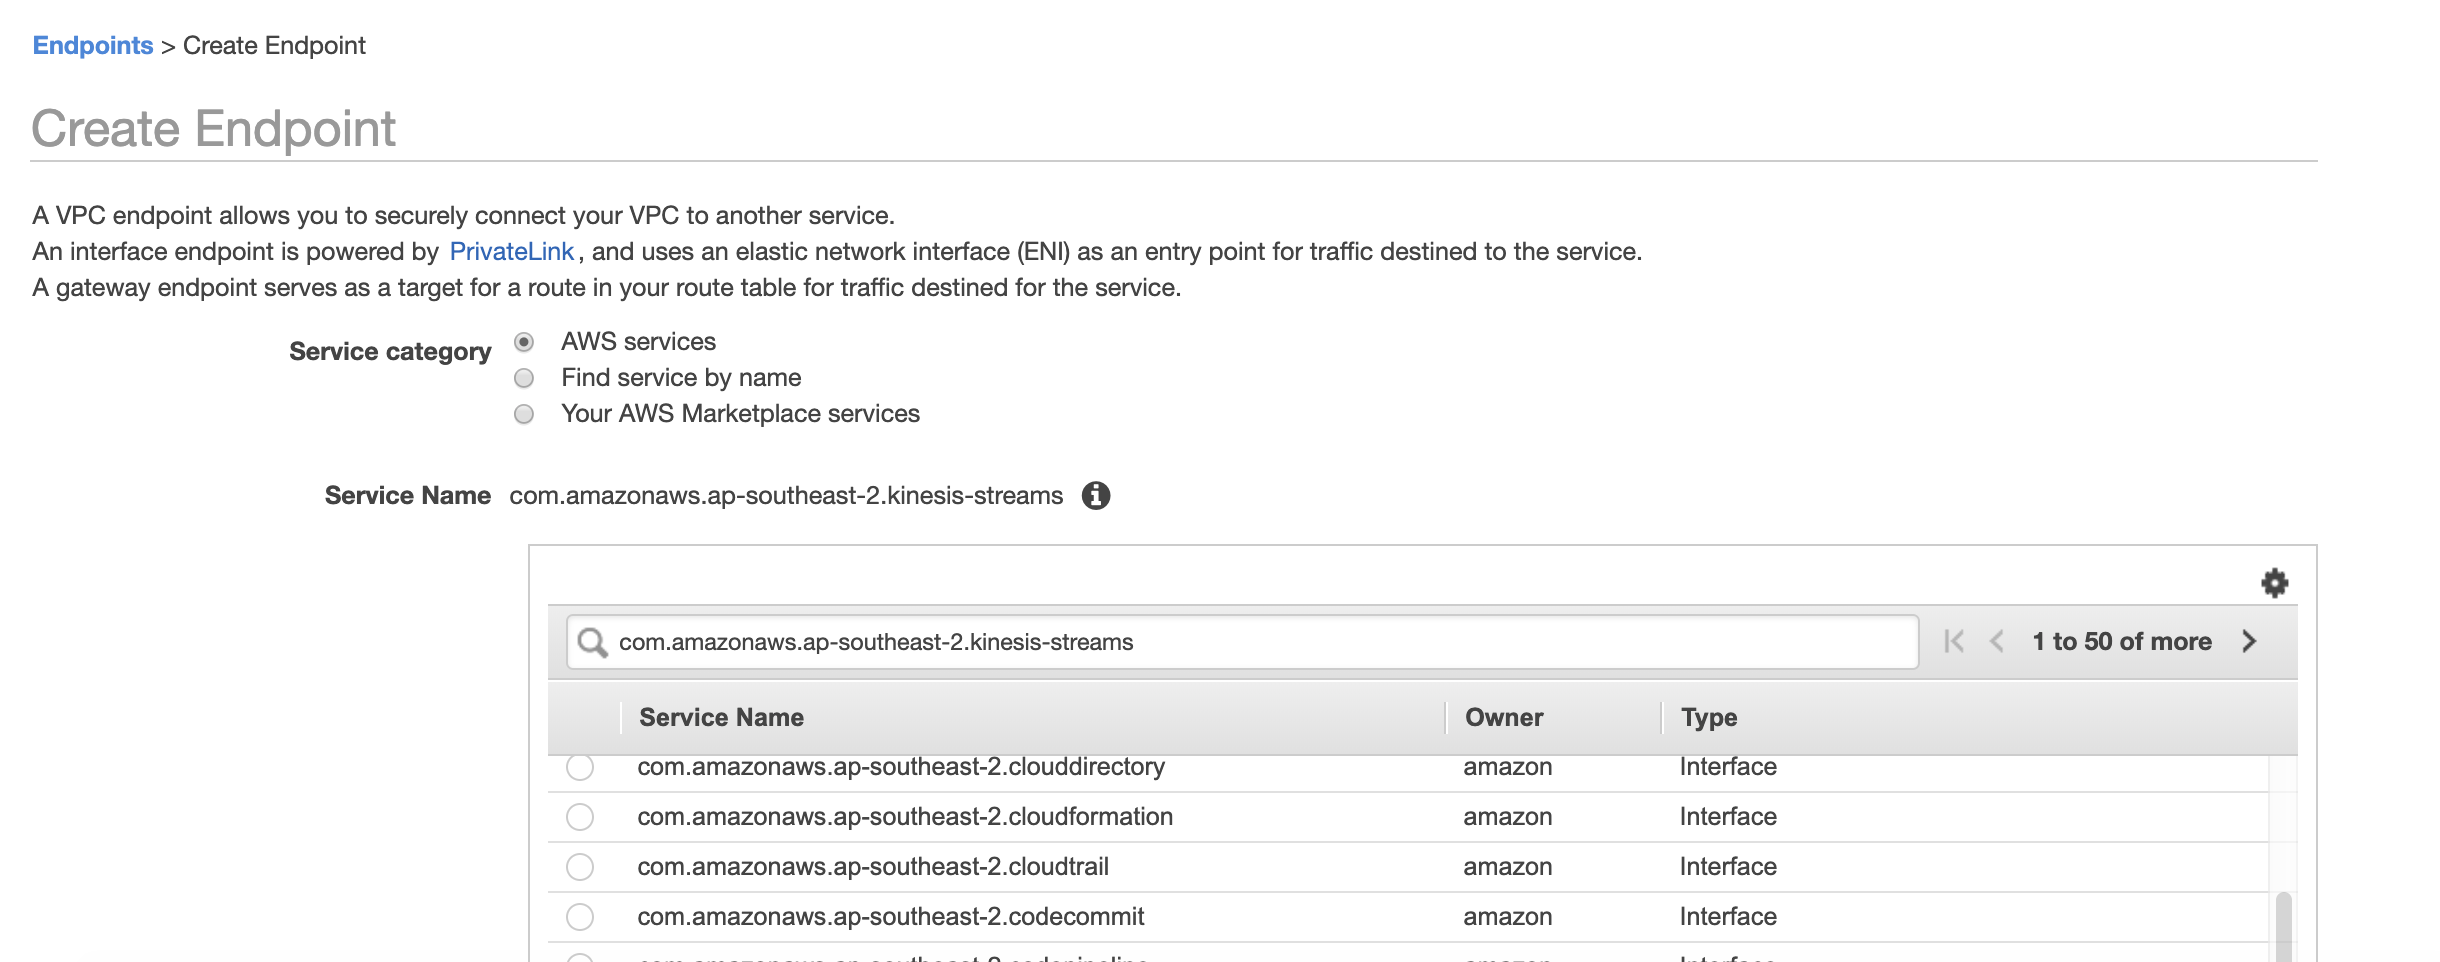 Endpoints > Create Endpoint

Create Endpoint

AVPC endpoint allows you to securely connect your VPC to another service.

An interface endpoint is powered by PrivateLink, and uses an elastic network interface (ENl) as an entry point for traffic destined to the service.

A gateway endpoint serves as a target for a route in your route table for traffic destined for the service.

Service category © AWS services
©. Find service by name

© Your AWS Marketplace services

Service Name com.amazonaws.ap-southeast-2.kinesis-streams @

Q com.amazonaws.ap-southeast-2.kinesis-streams

Service Name
com.amazonaws.ap-southeast-2.clouddirectory
com.amazonaws.ap-southeast-2.cloudformation
com.amazonaws.ap-southeast-2.cloudtrail

com.amazonaws.ap-southeast-2.codecommit

Owner

amazon
amazon
amazon

amazon

Type

Interface
Interface
Interface

Interface

1to50o0fmore >

+